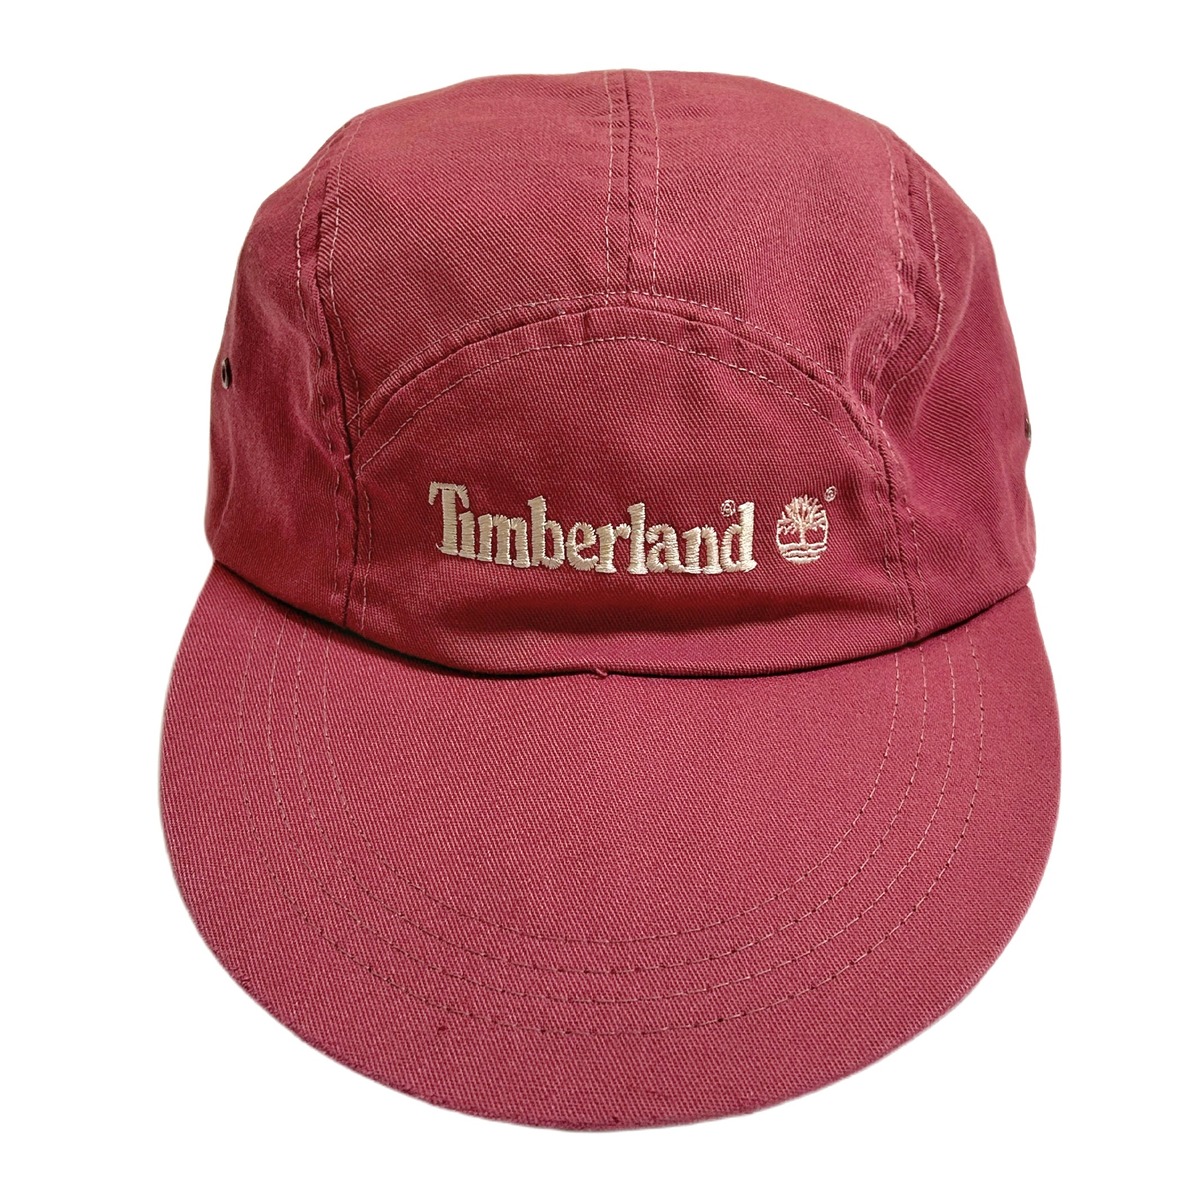 Briesje religie plaag 90s Timberland ティンバーランド ロングビル キャップ WEATHERGEAR JET CAP MADE IN USA | BACK  IN THE DAYZ.